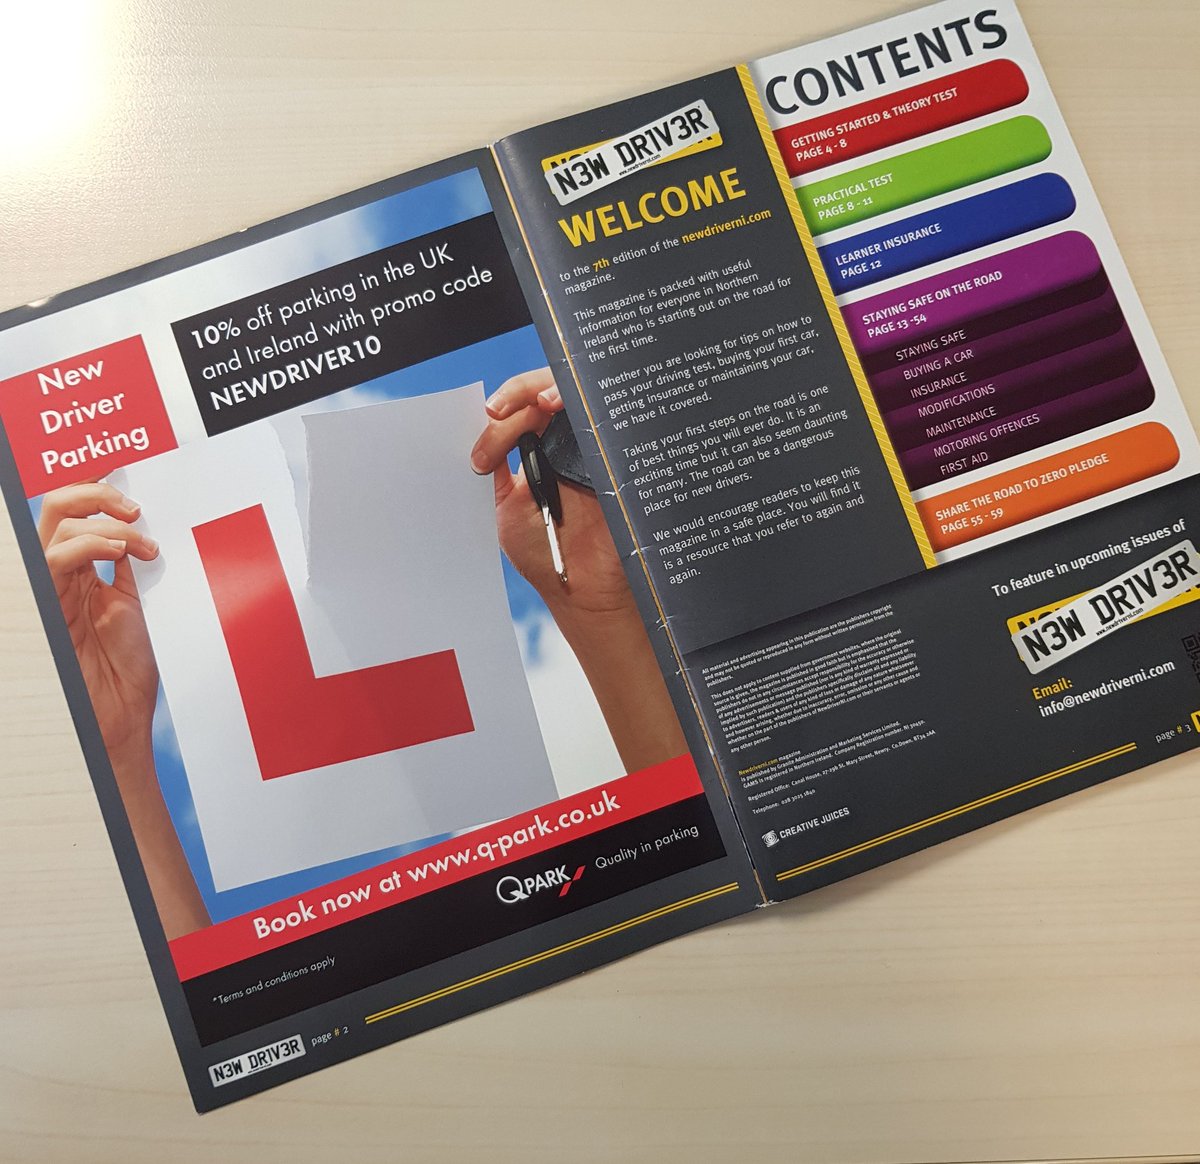 RT @QPARKIRELAND: Great to see our ad in the @Newdriverni, the safe motoring magazine offering information to Northern Ireland's new drivers #newdriver #RoadSafety #learnerdriver